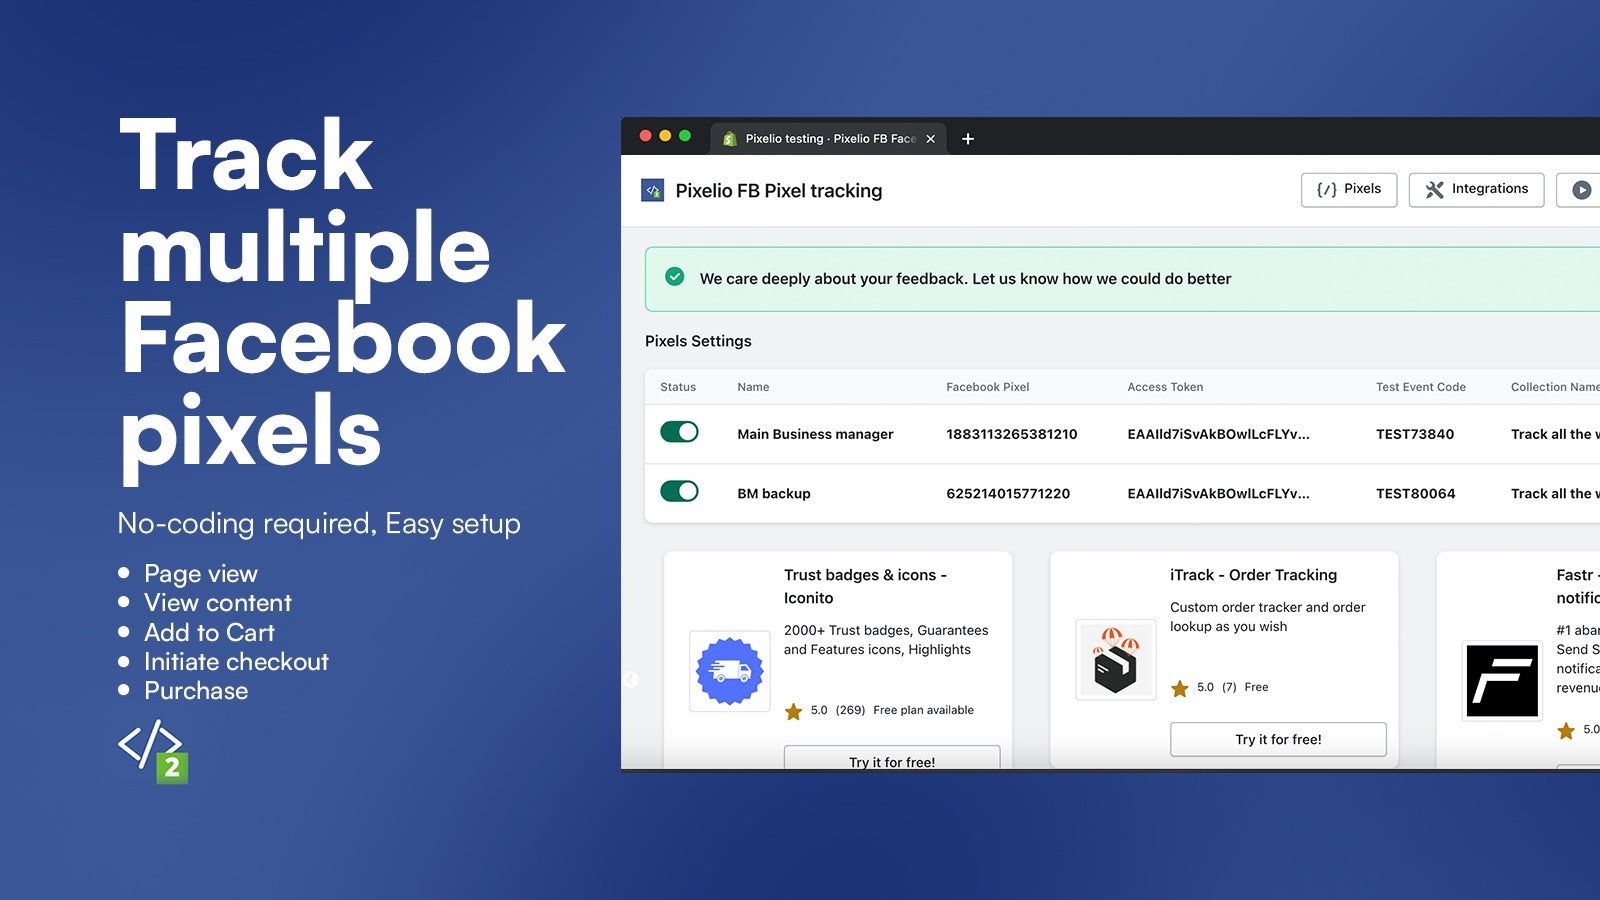 Facebook Pixel ad manager business account dashboard multiple